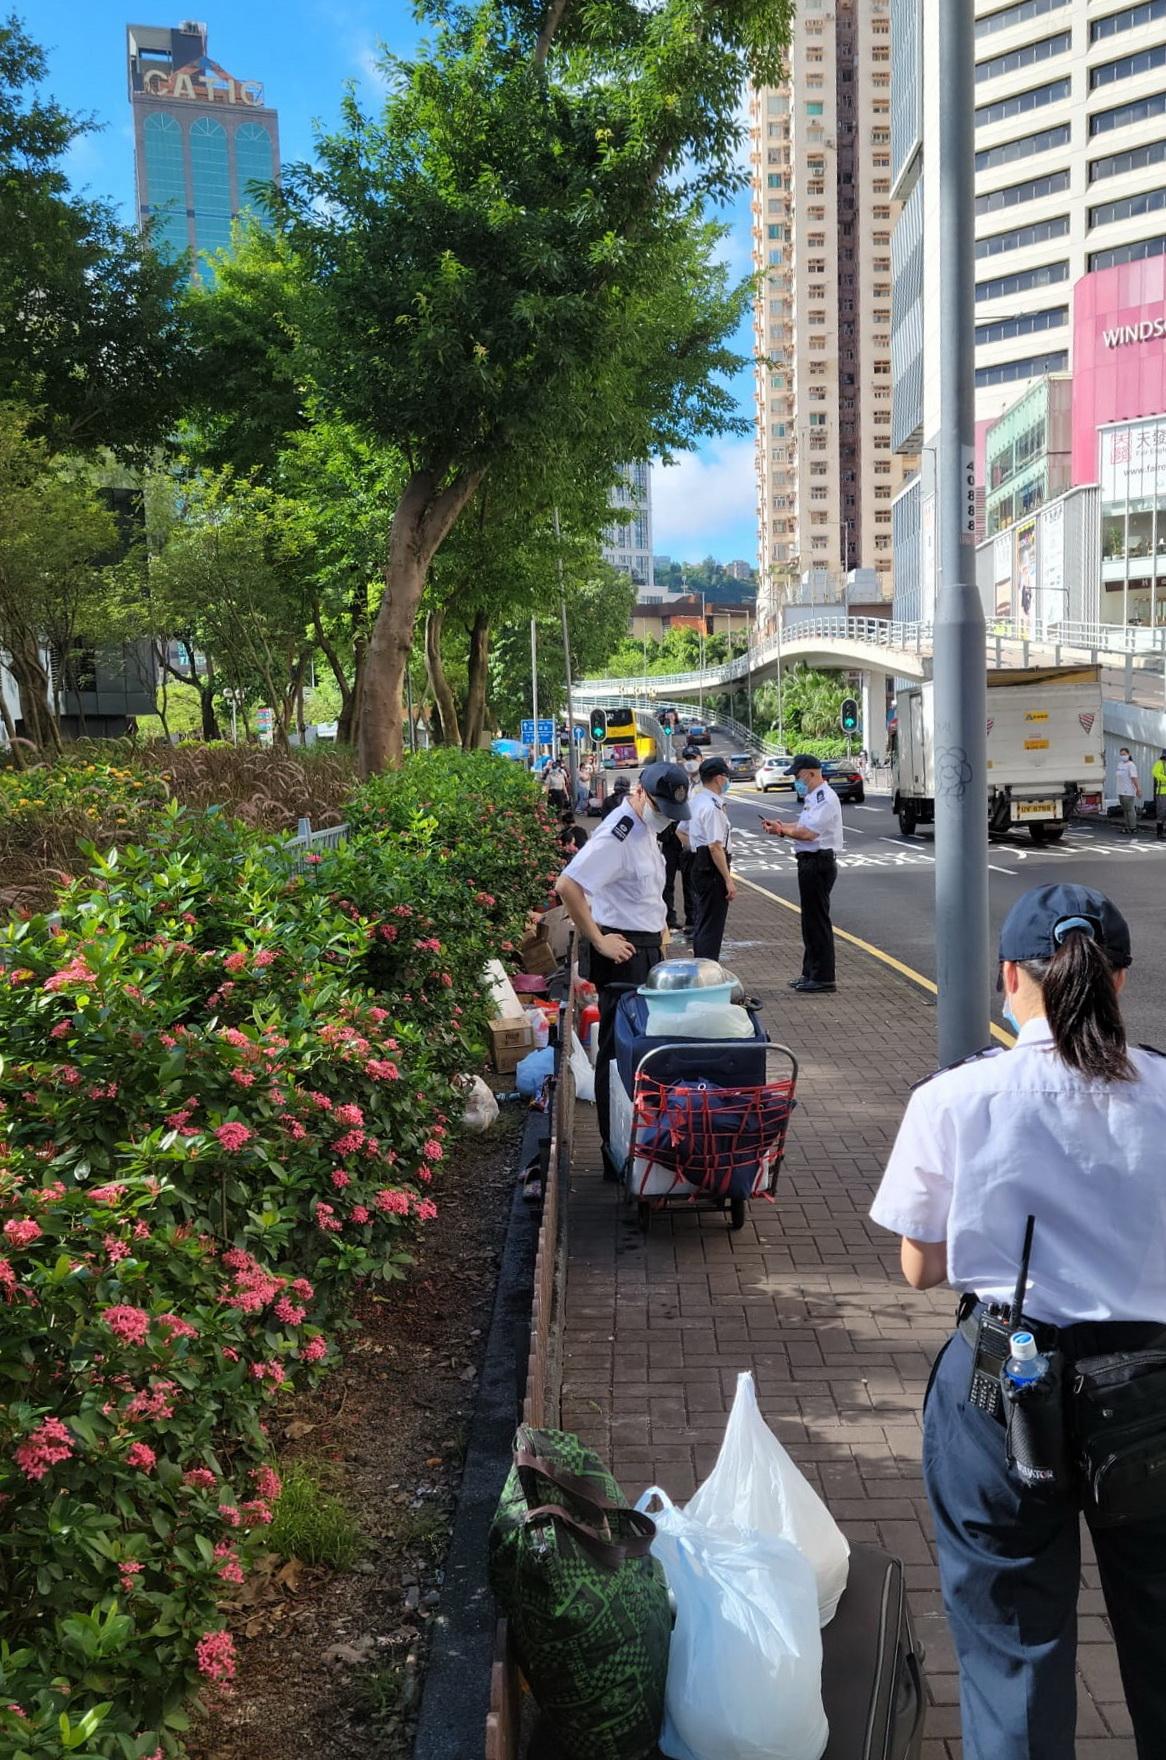 The Food and Environmental Hygiene Department (FEHD) conducted joint operations with several government departments over the past weekend (July 9 and 10) to carry out publicity and educational work at popular places in various districts where the public and domestic helpers commonly gather, urging them to comply with various anti-epidemic regulations and restrictions. Picture shows FEHD enforcement officers combatting unlicensed hawking activities during an operation.